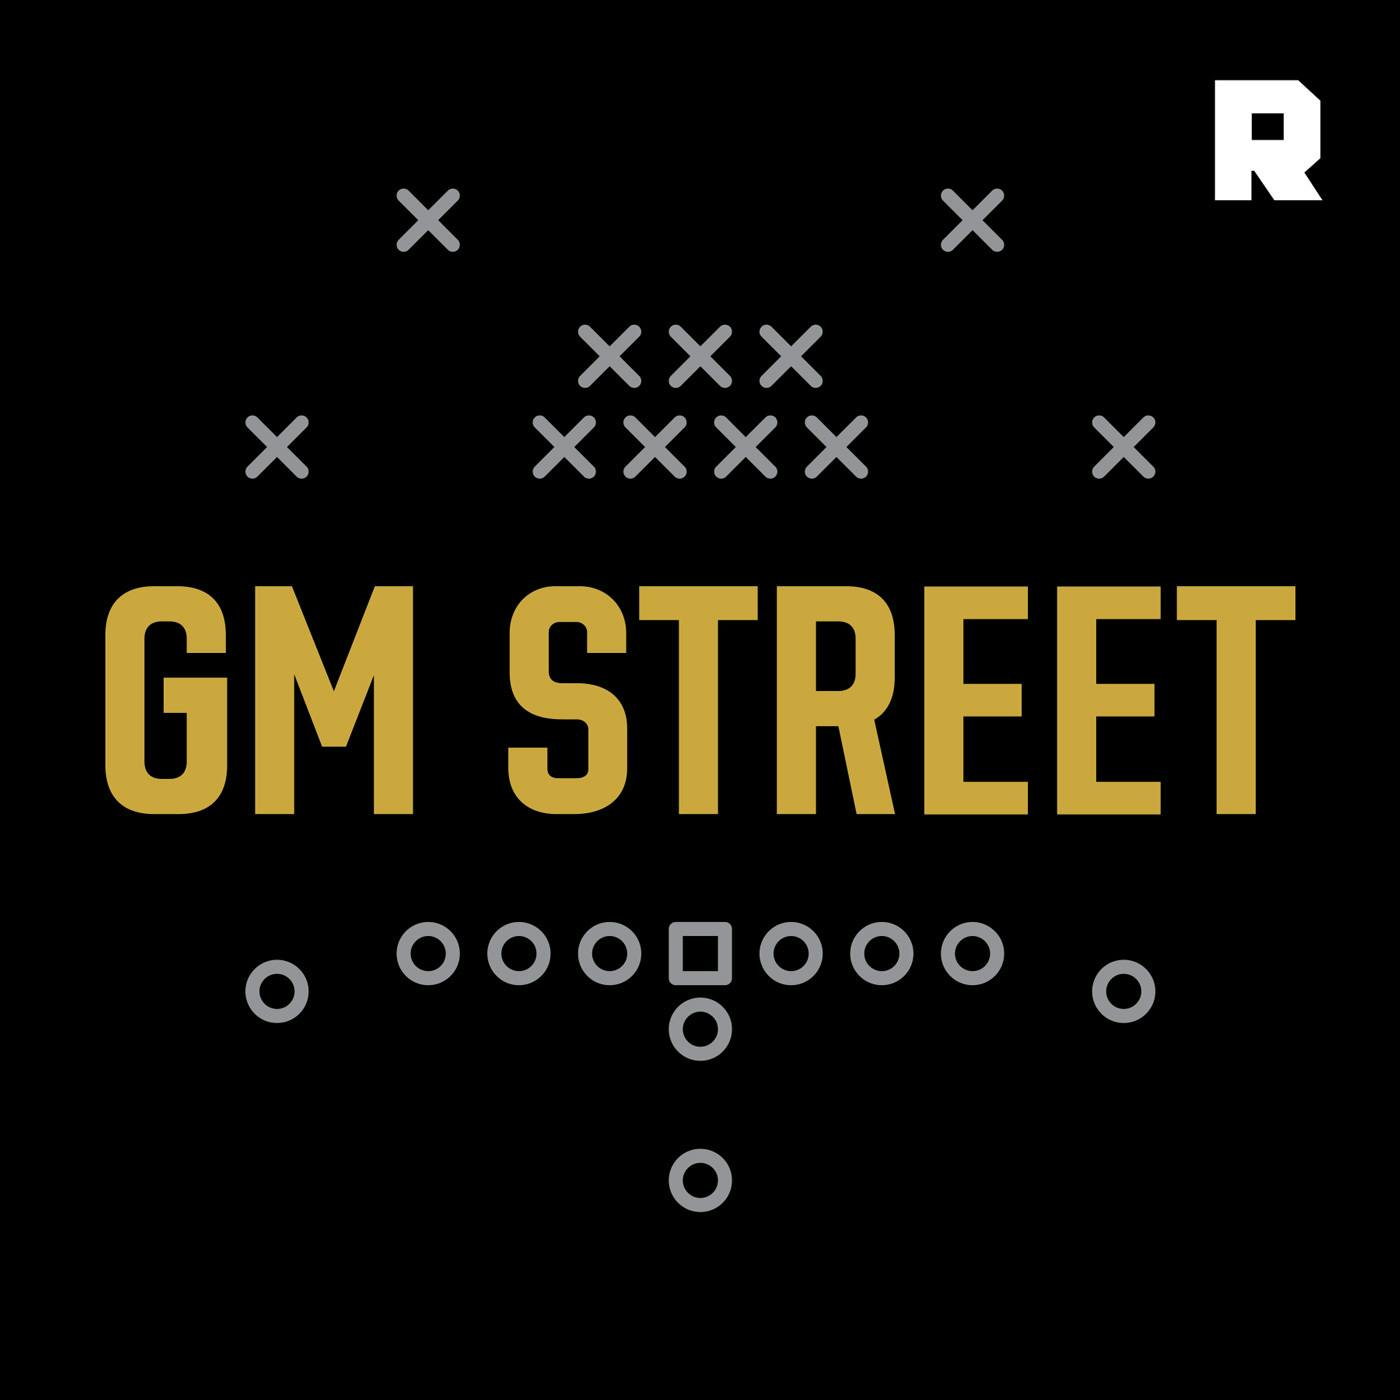 Key Super Bowl Advantages, the Kirk Cousins Sweepstakes, Prop Bets, and the Future of Football | GM Street (Ep. 233)